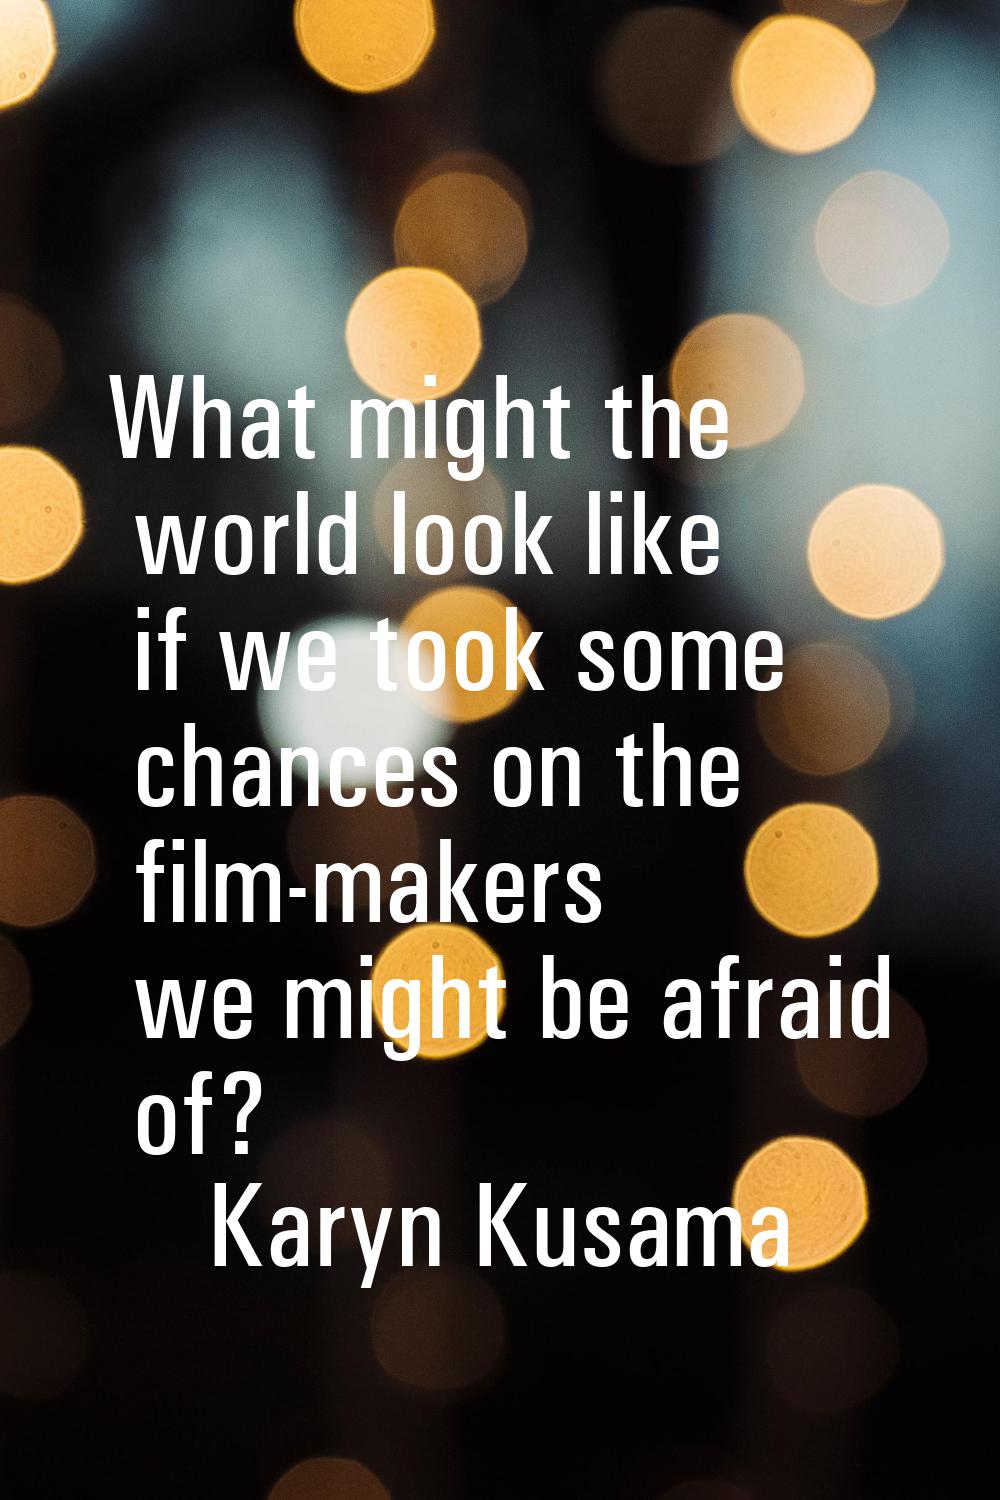 What might the world look like if we took some chances on the film-makers we might be afraid of?